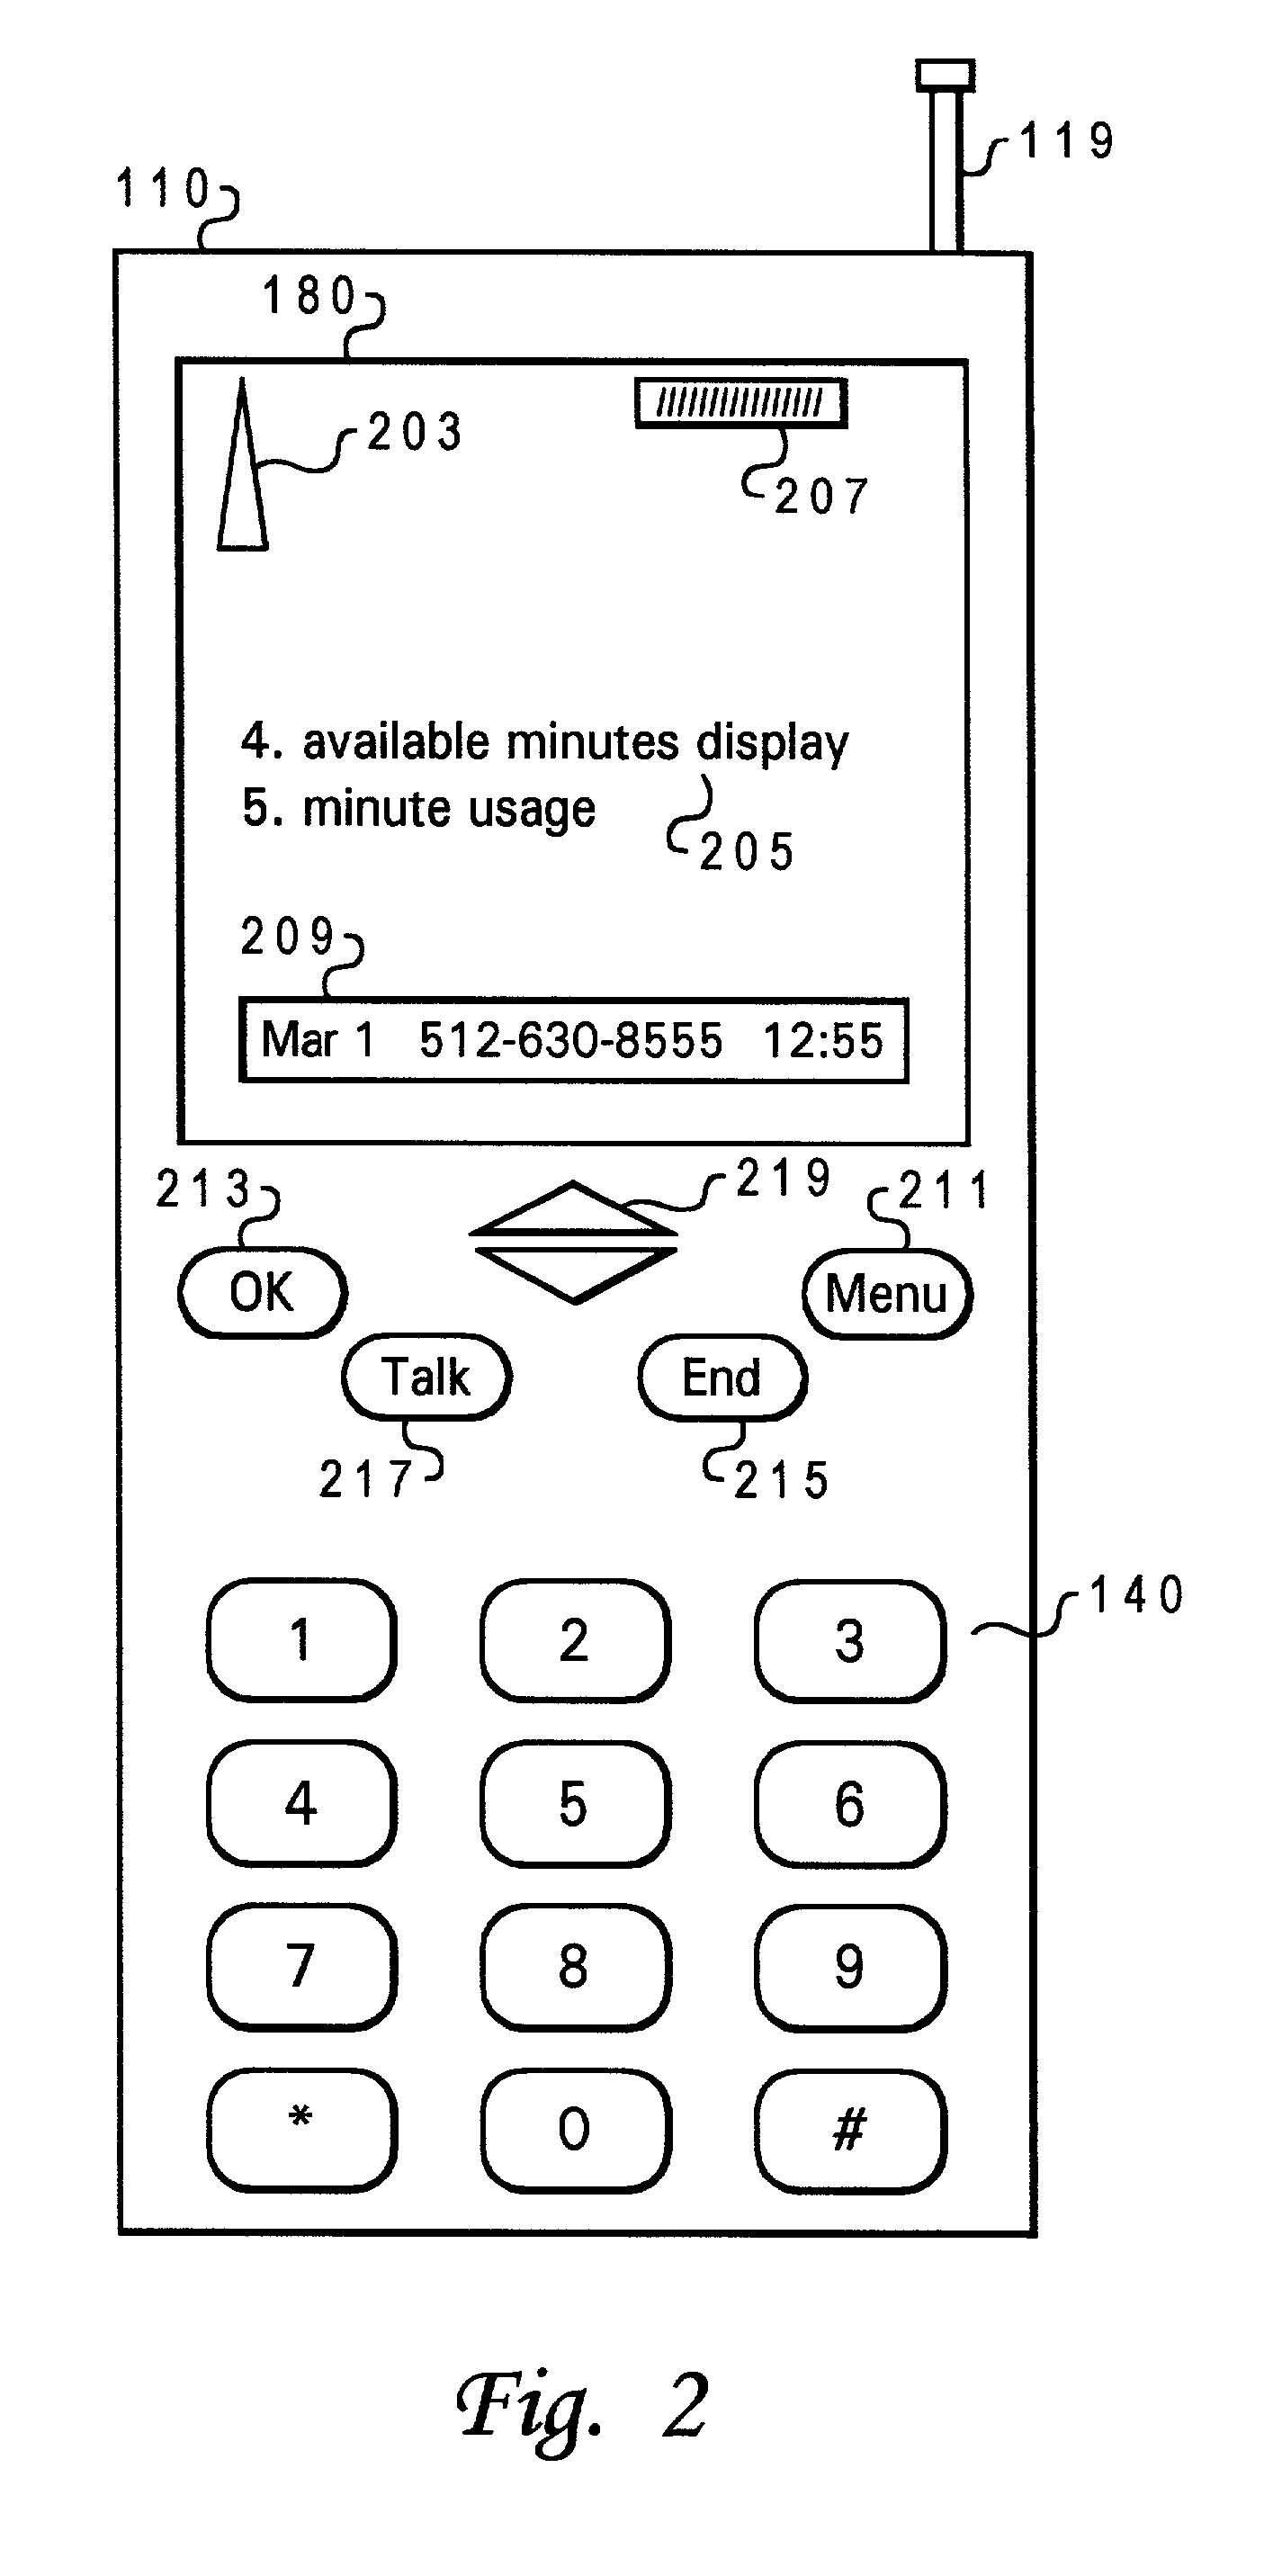 Cell phone minute usage calculation and display